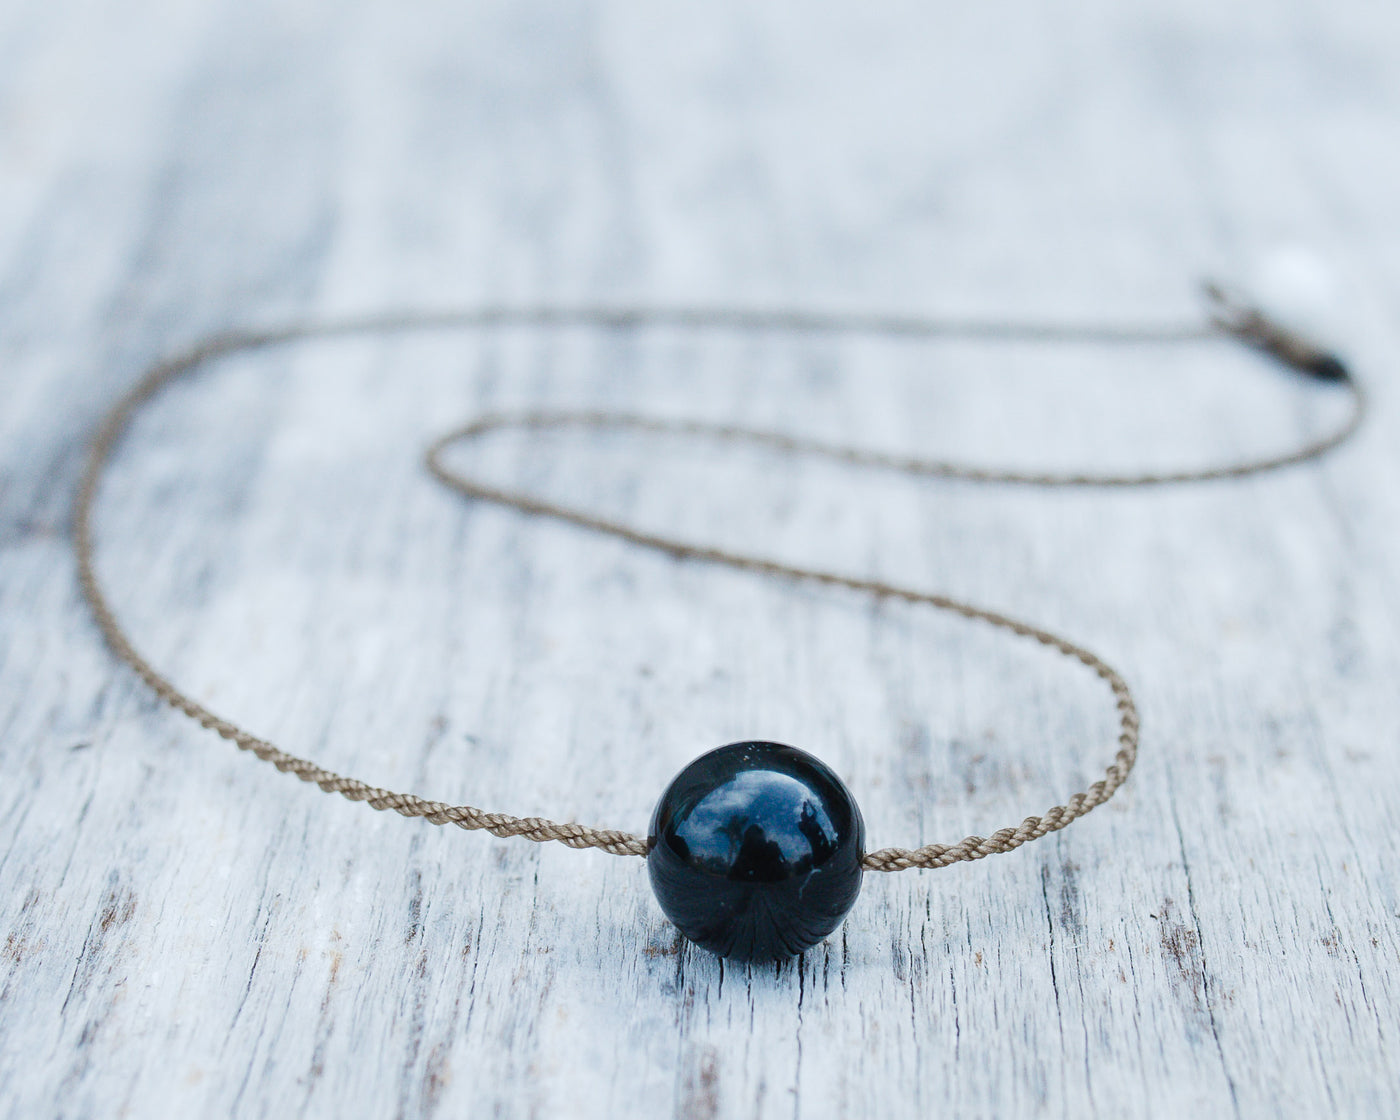 Classic Single Necklace-1764-Obsidian Round